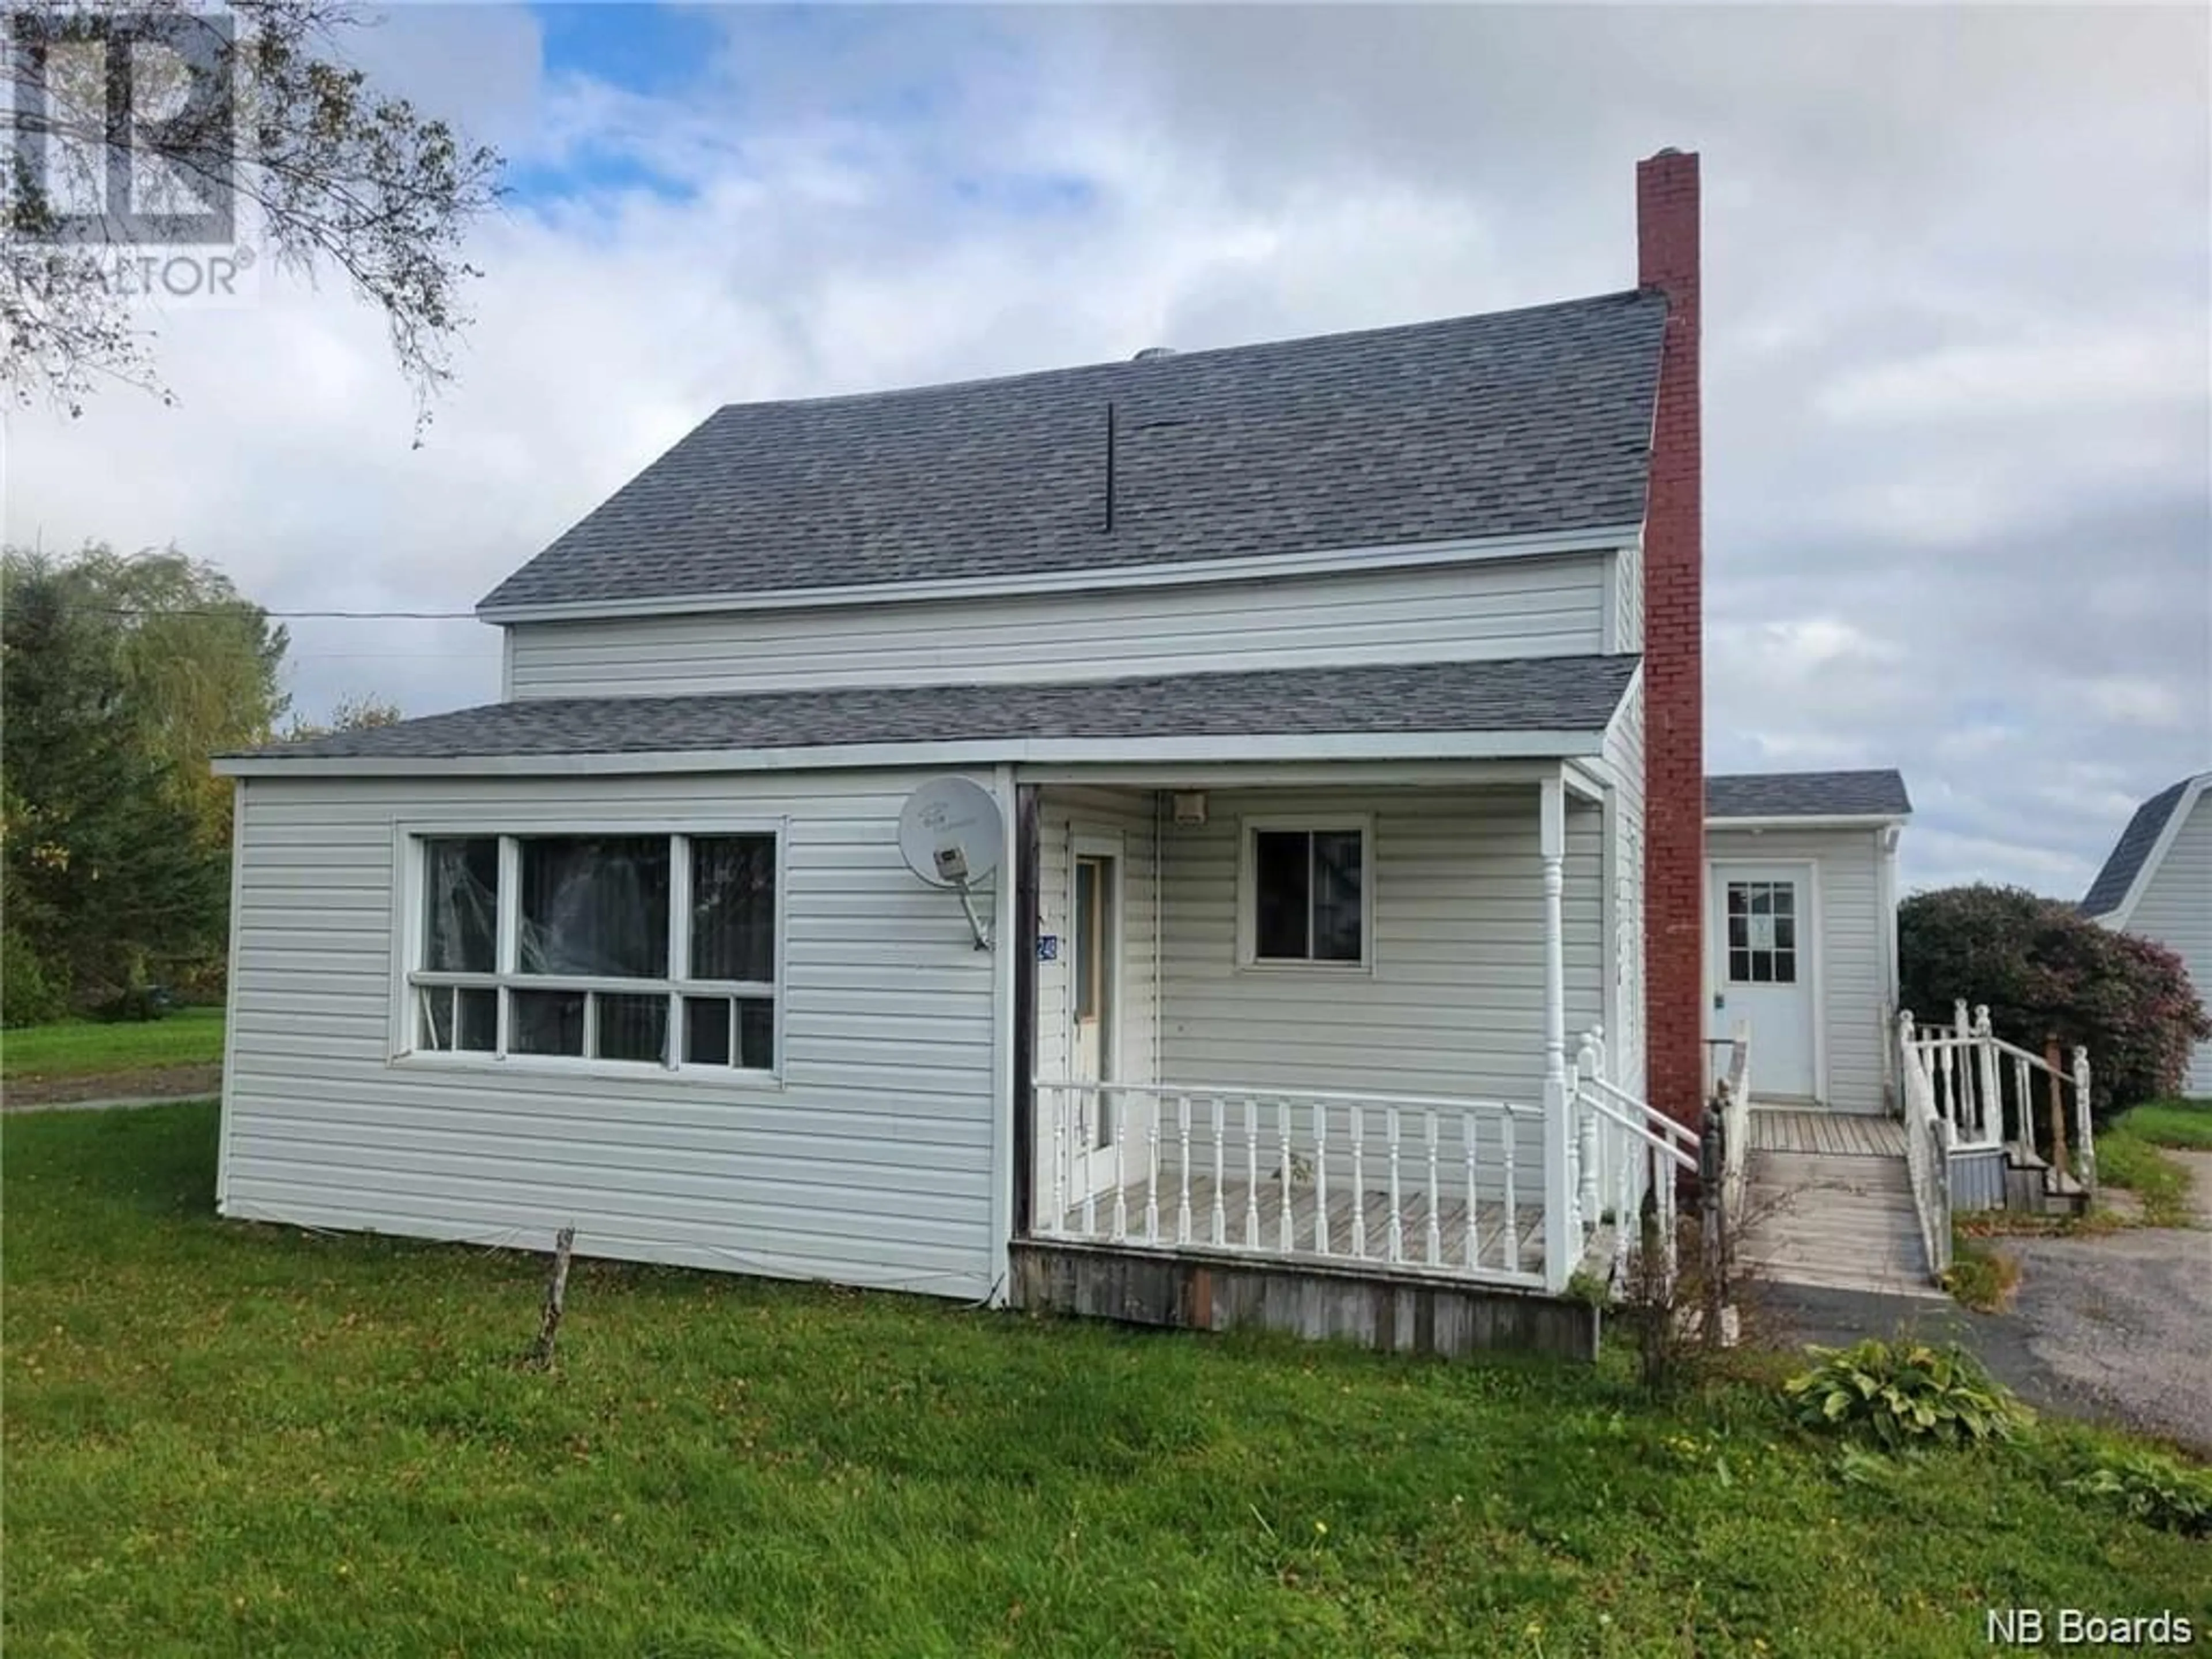 Home with unknown exterior material for 3248 Rue Brideau, Tracadie New Brunswick E1X1A5